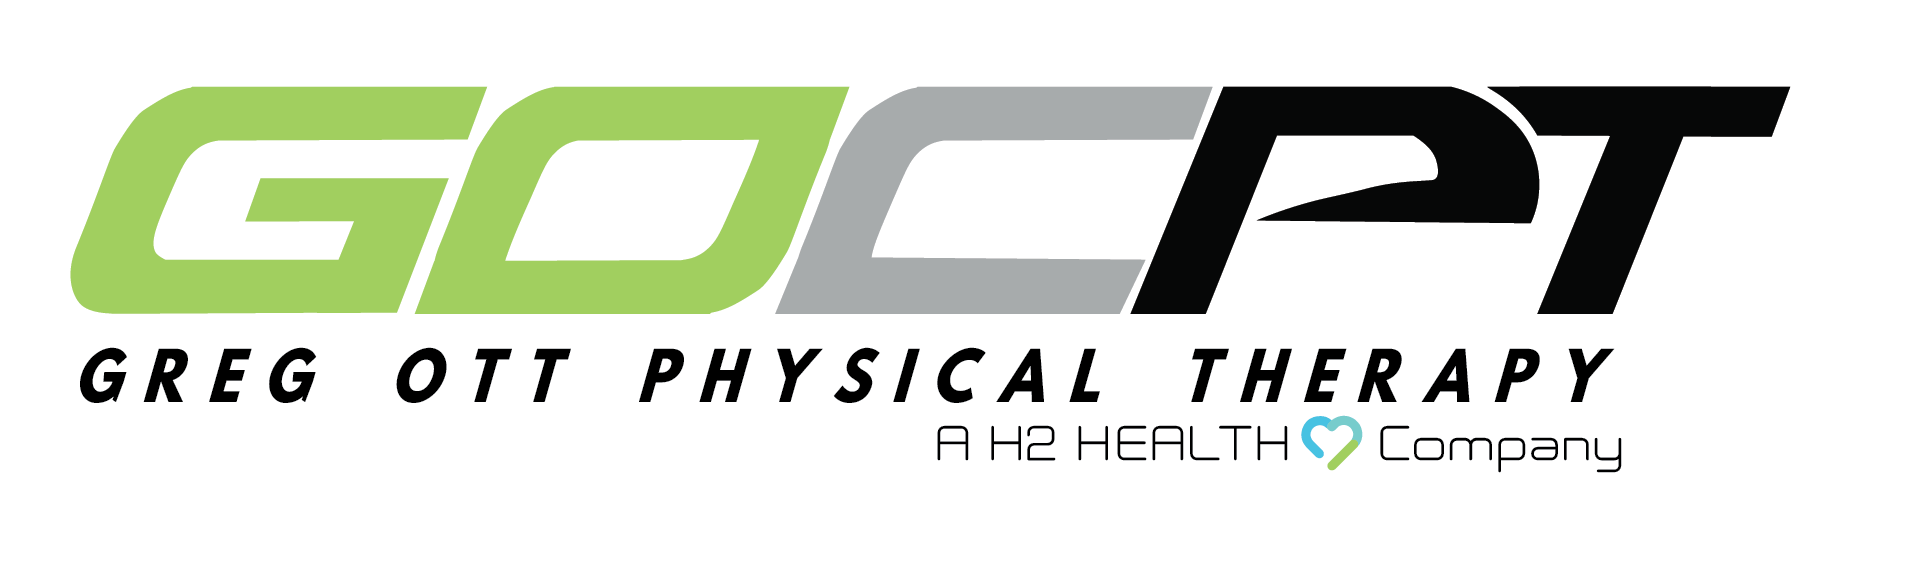 greg ott center for physical therapy logo